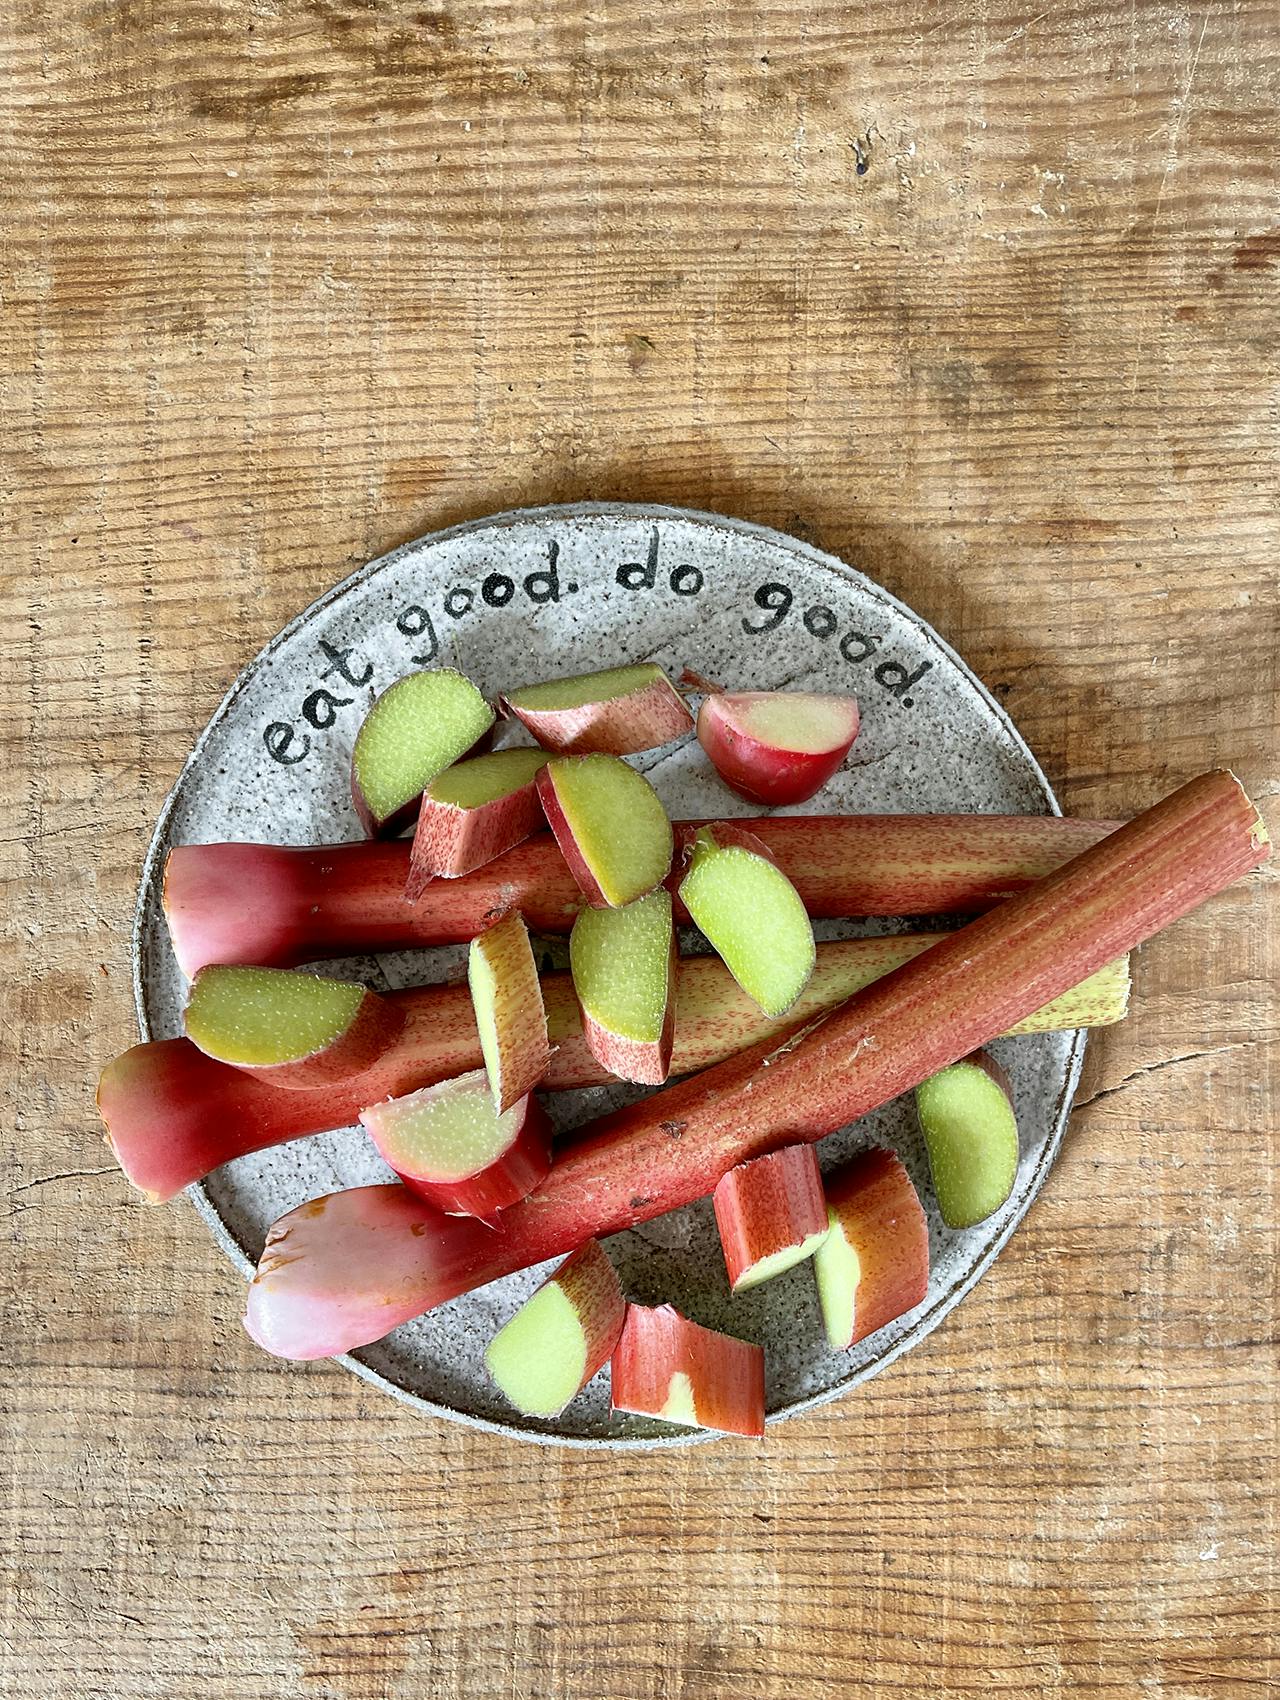 15 Tips You Need When Cooking With Rhubarb